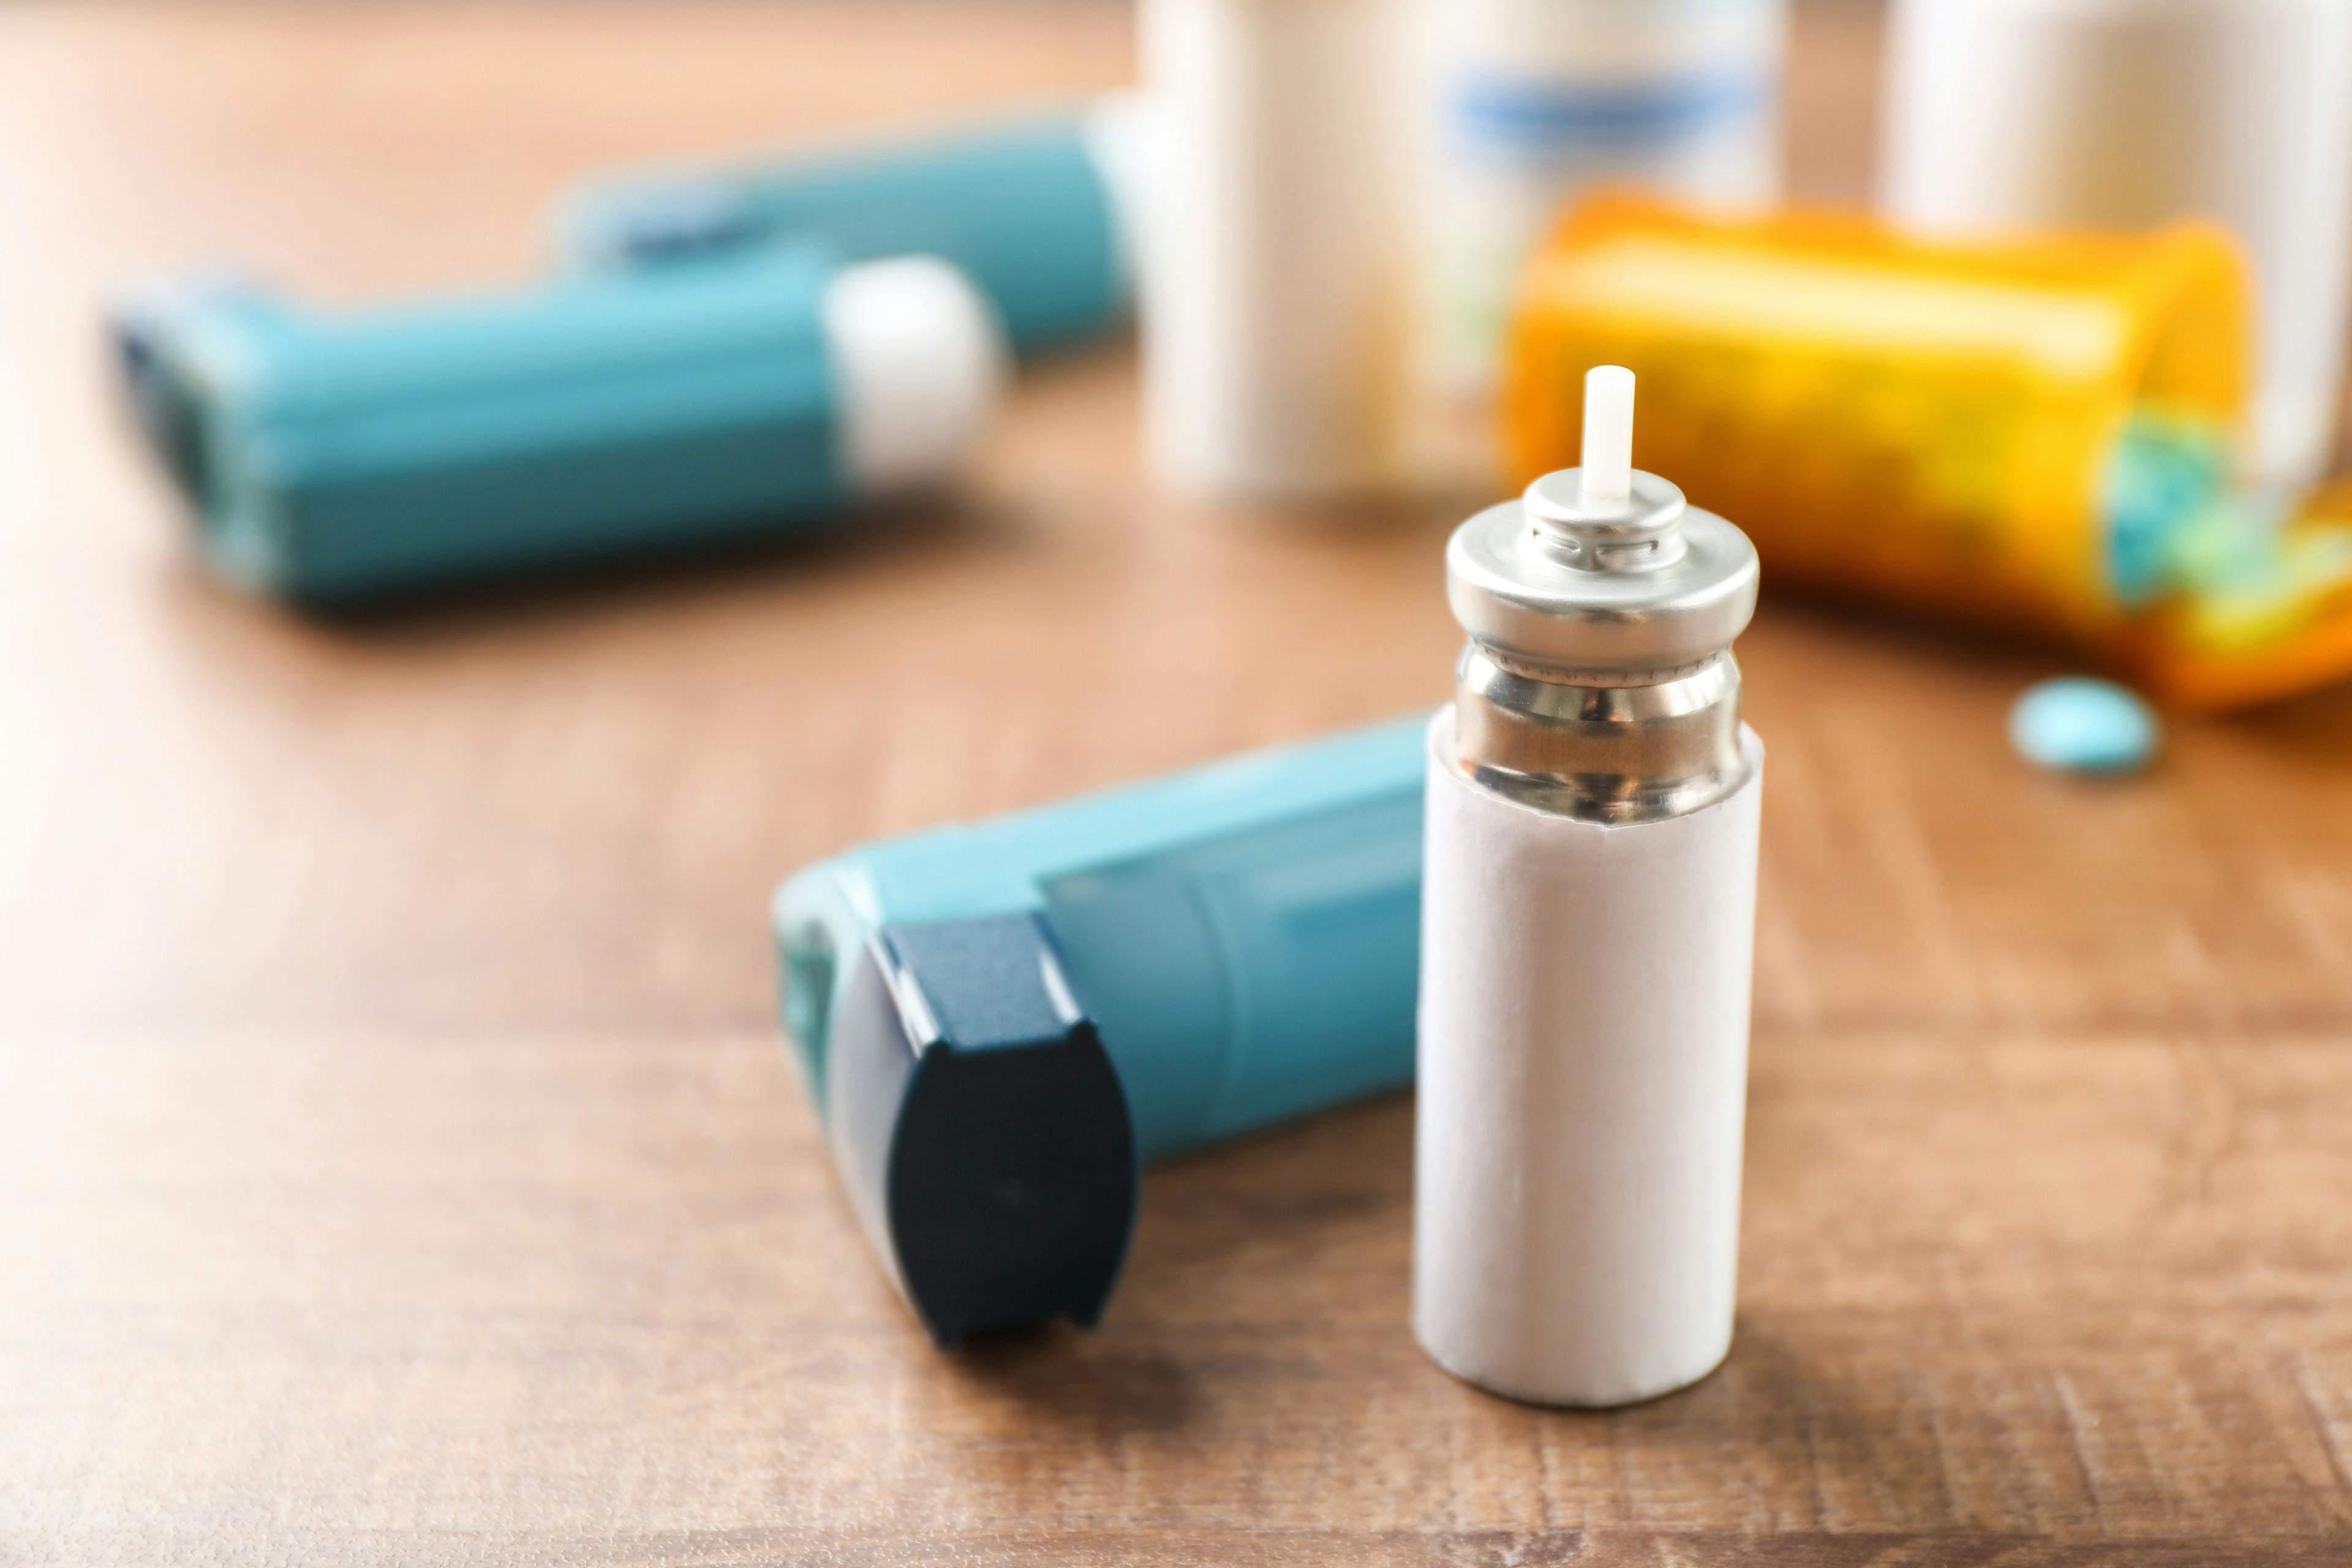 Asthma inhaler with cartridge on wooden table | Image Credit: Africa Studio - stock.adobe.com